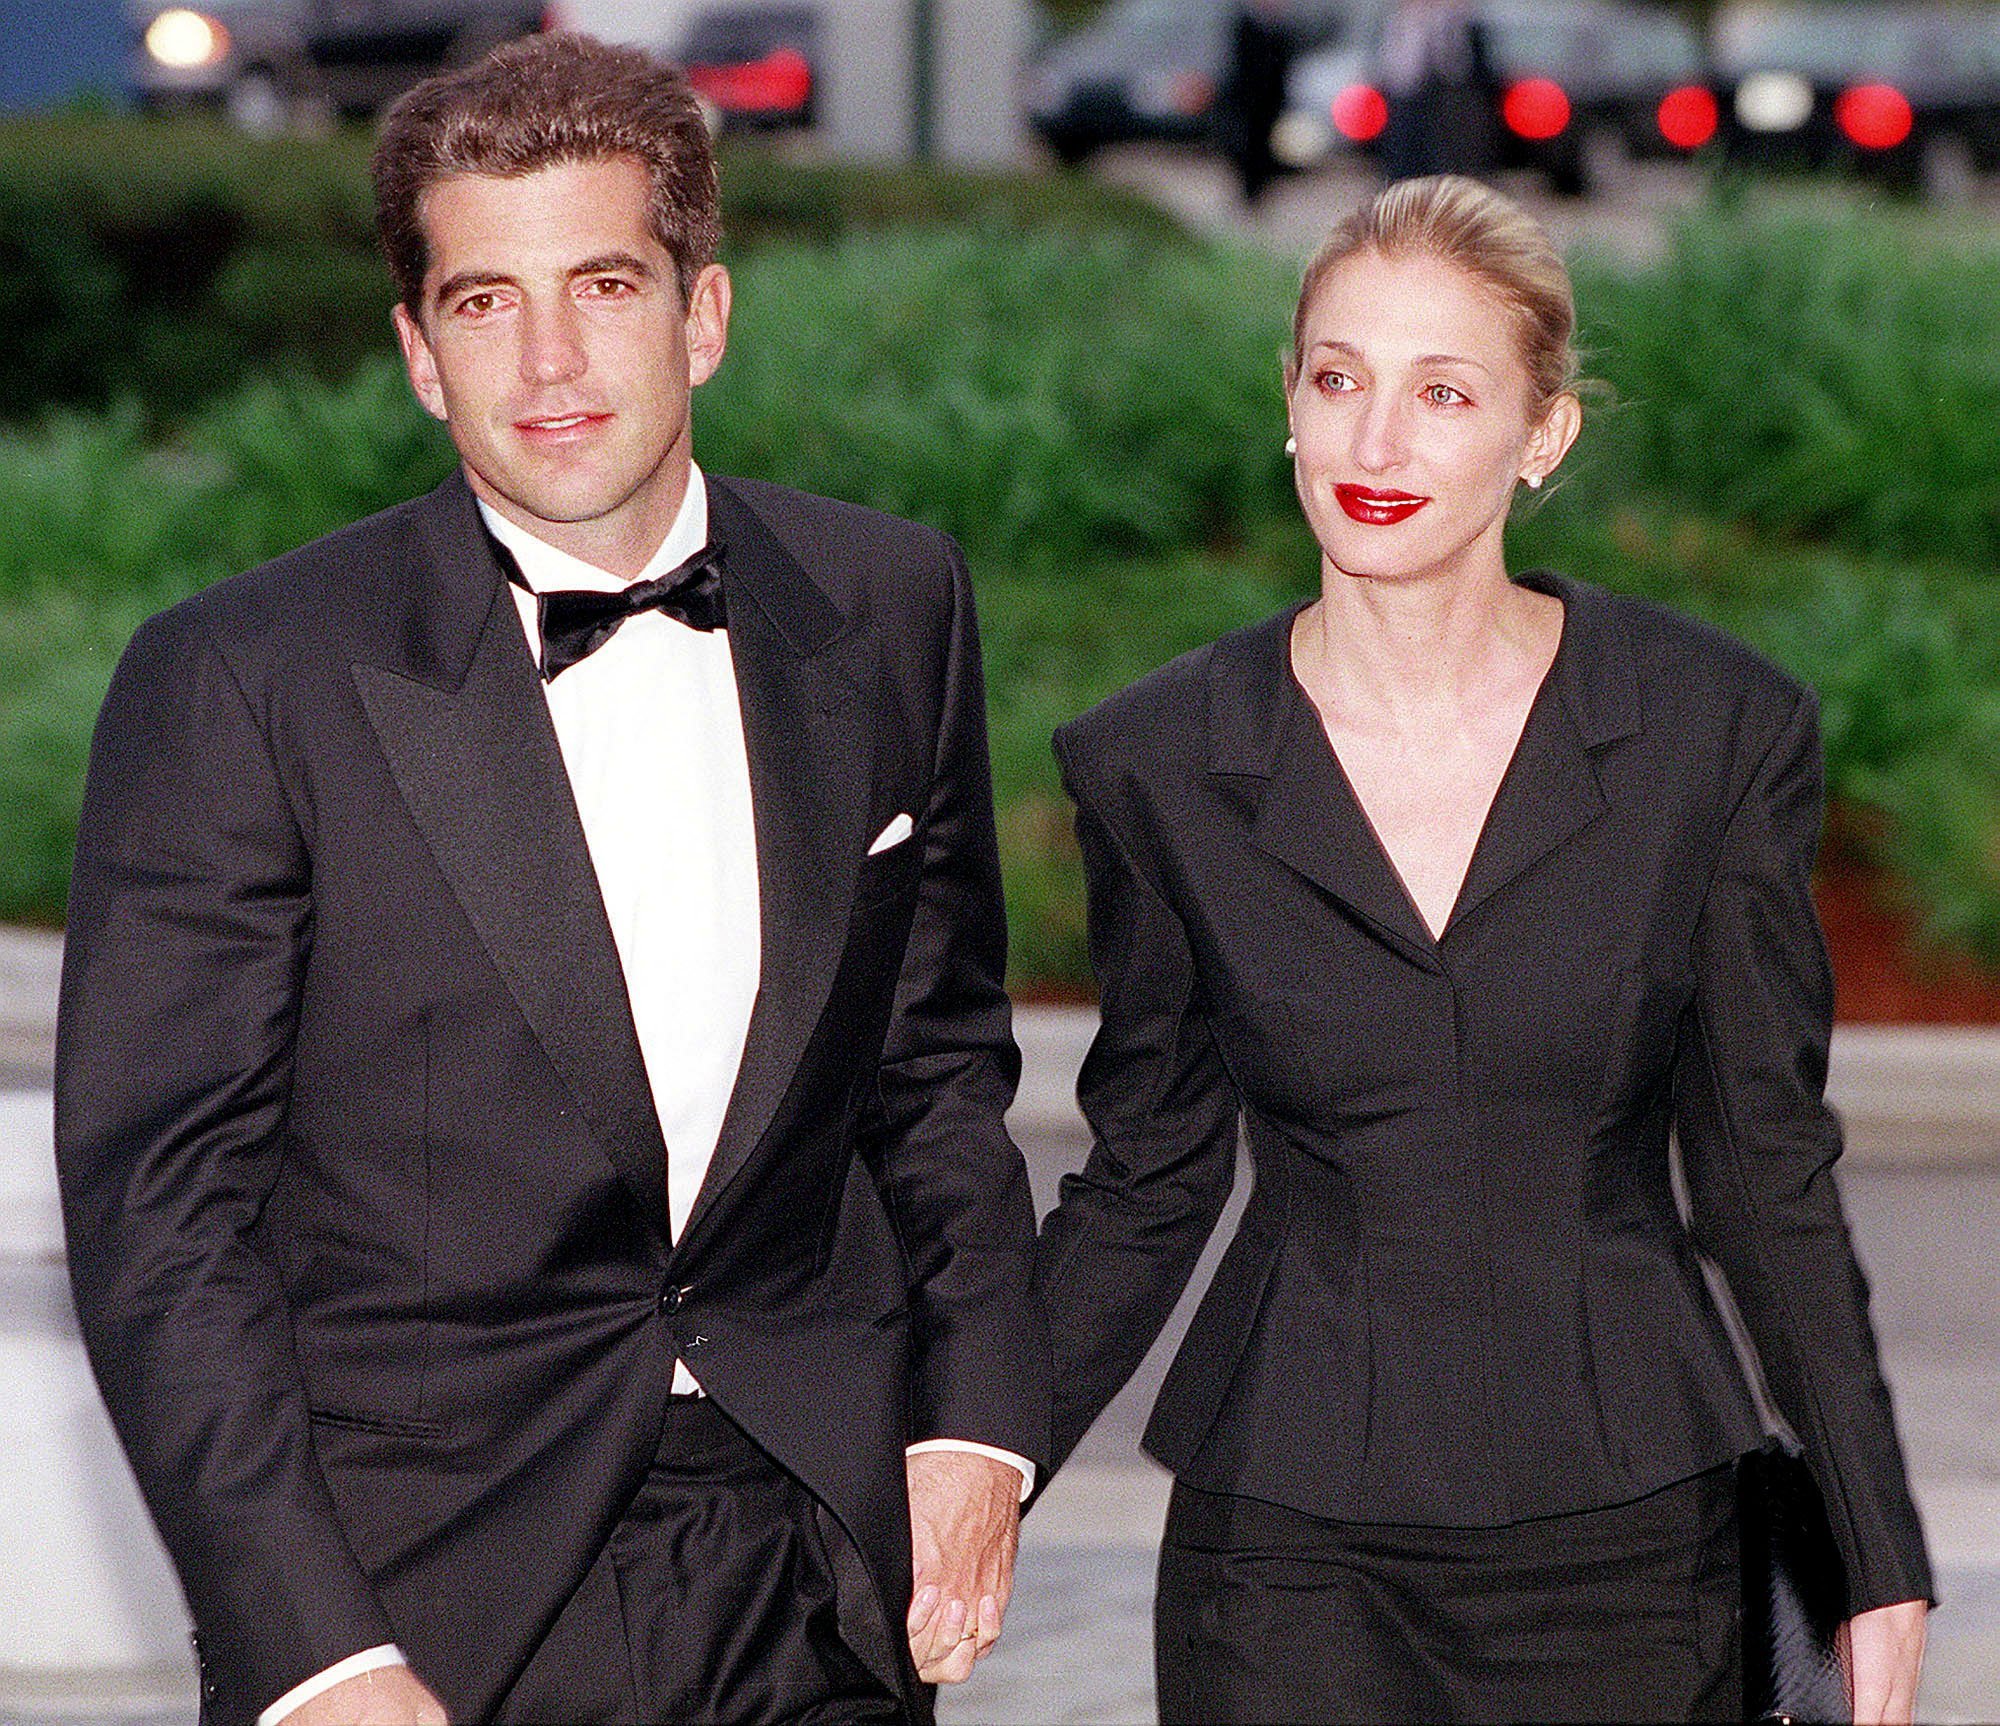 ohn F. Kennedy, Jr. and his wife Carolyn Bessette Kennedy arrive at the annual John F. Kennedy Library Foundation dinner on May 23, 1999, at the Kennedy Library in Boston, MA. | Source: Getty Images.